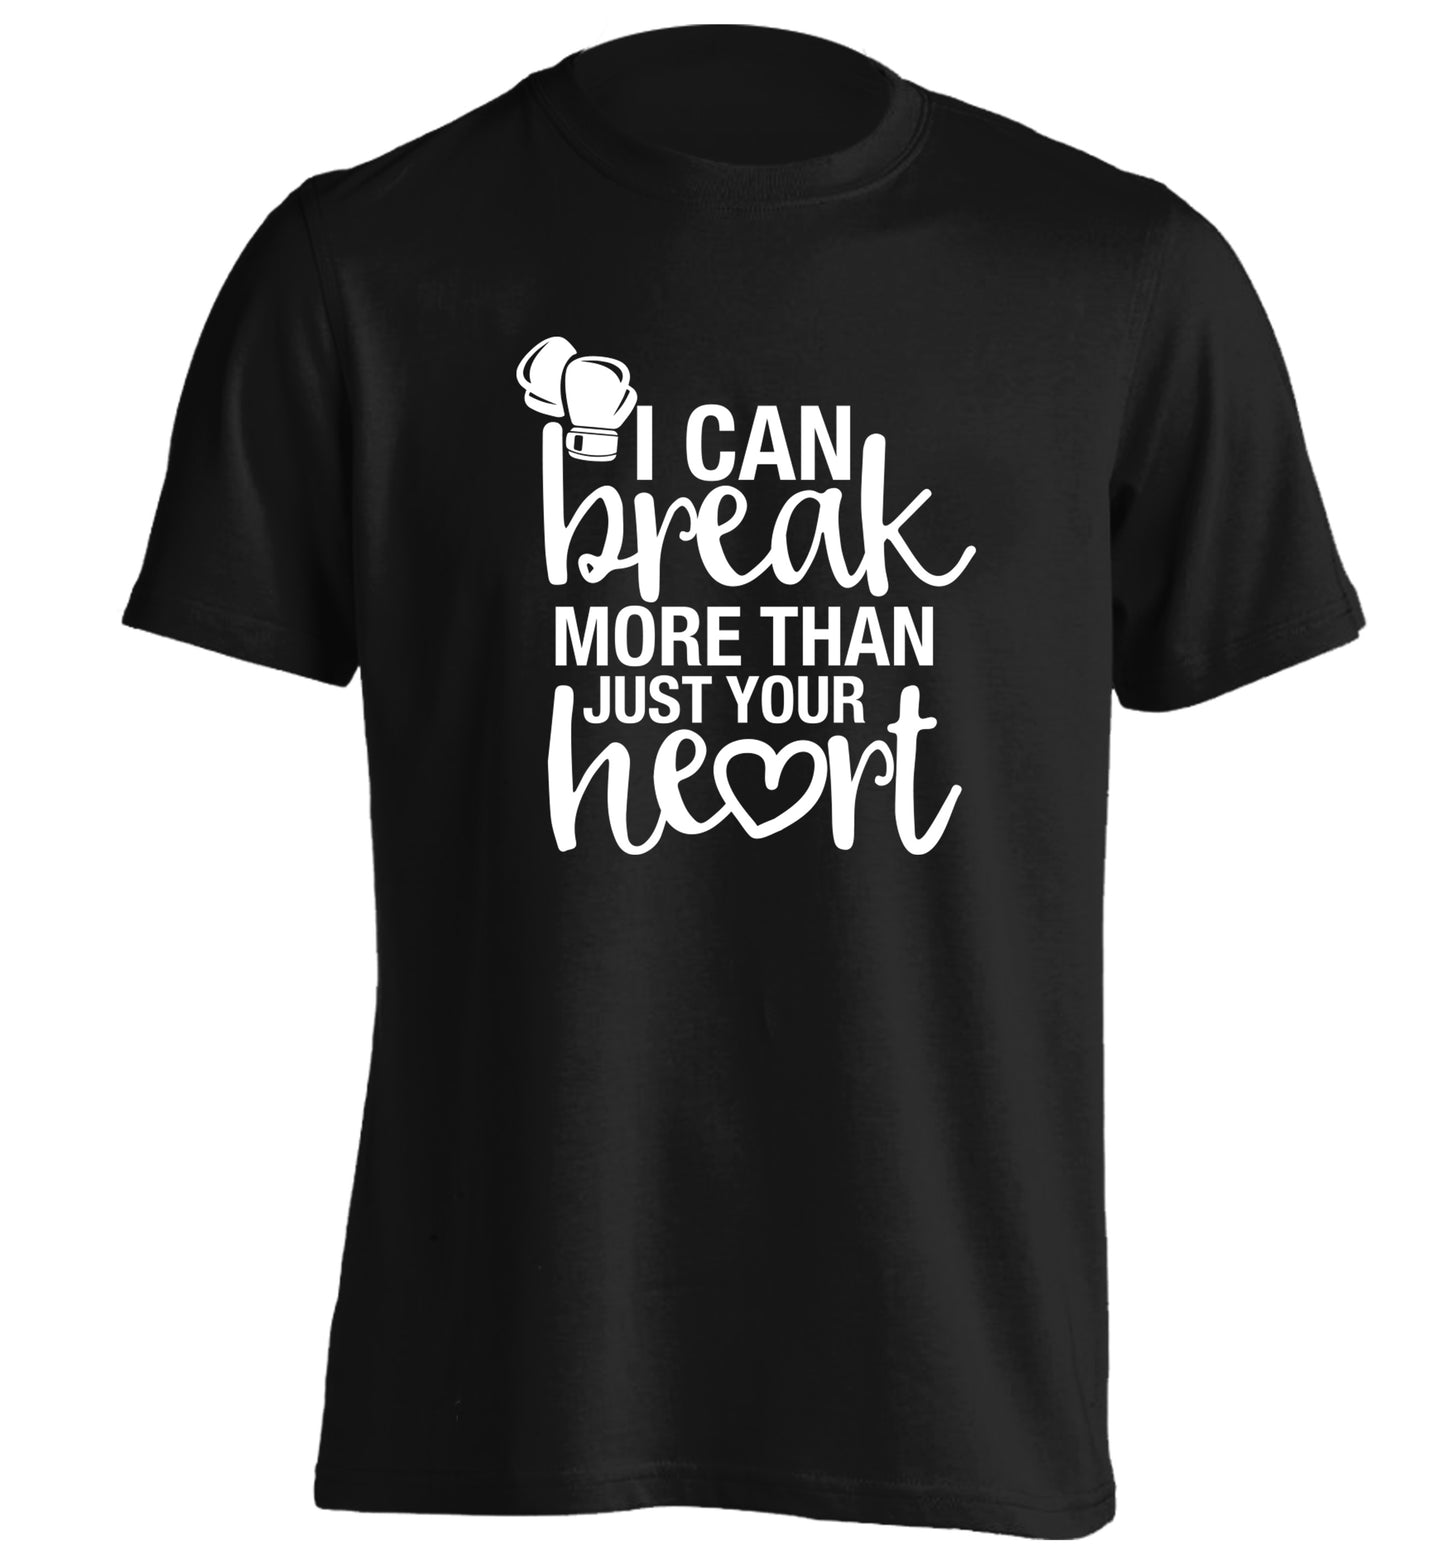 I can break more than just your heart adults unisex black Tshirt 2XL